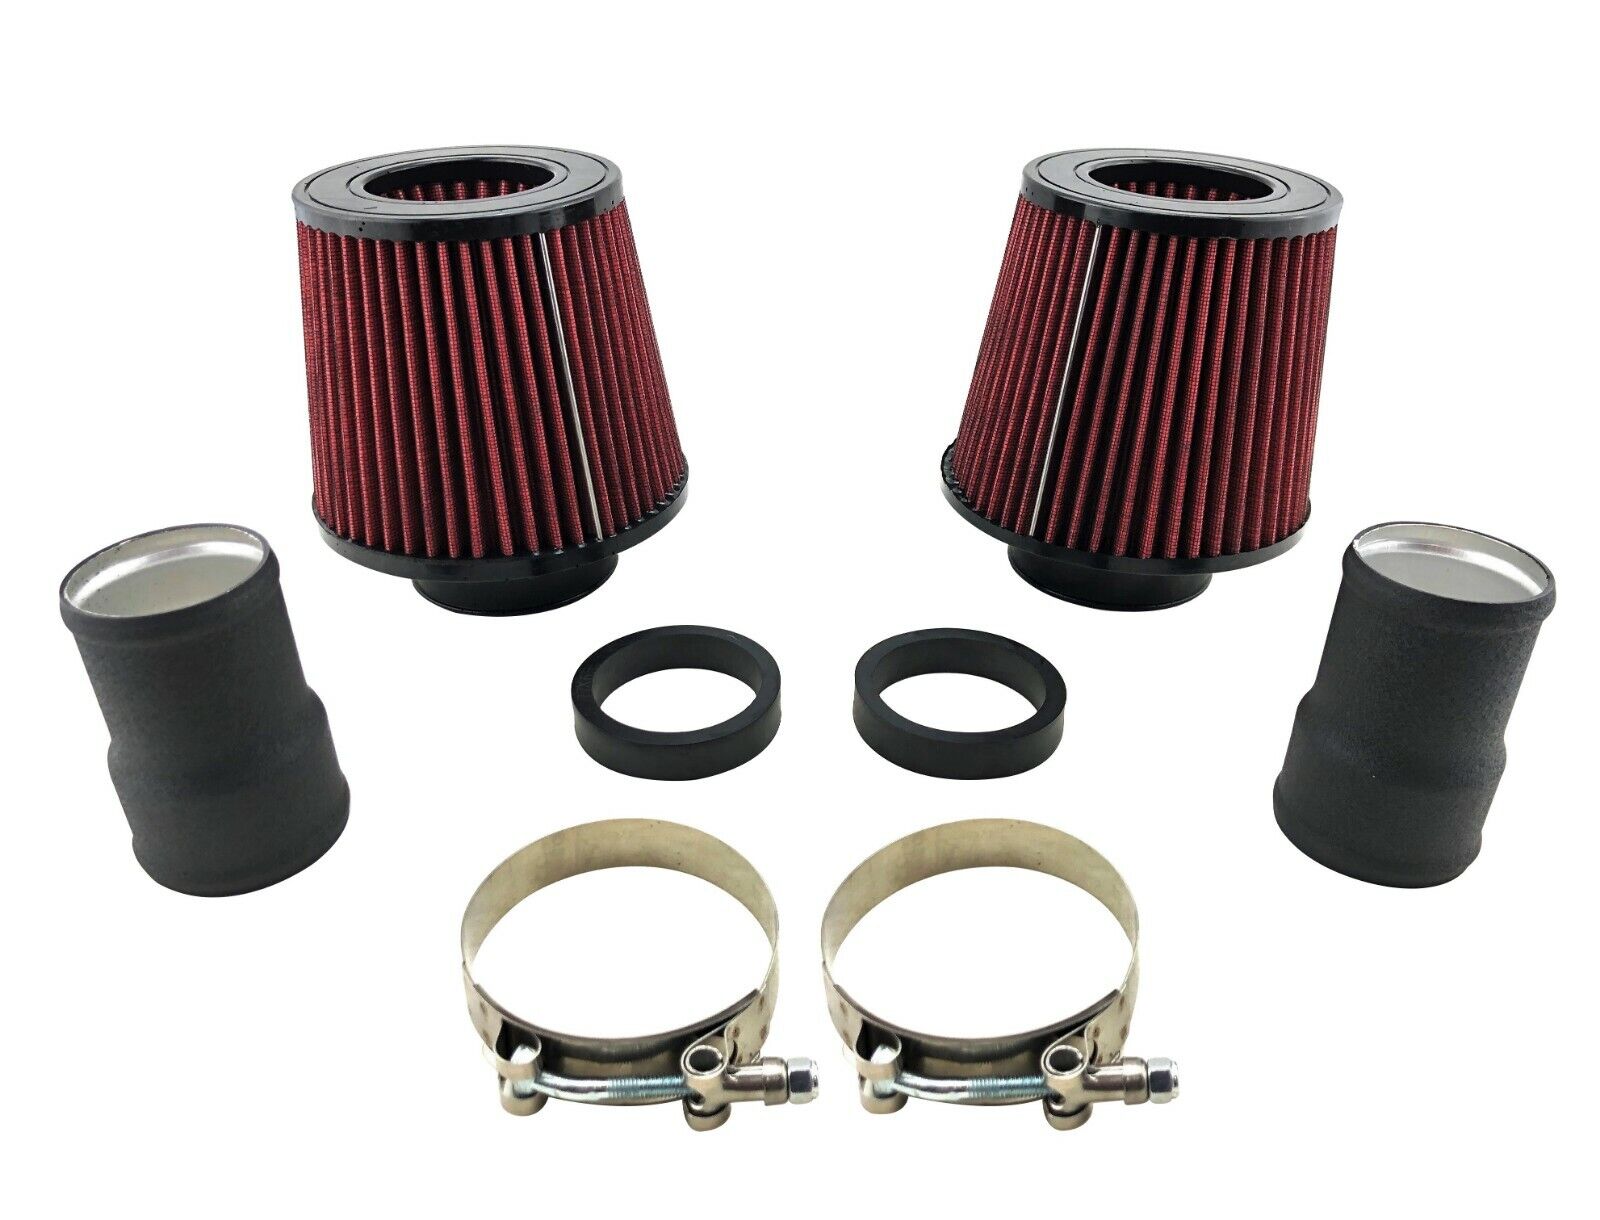 N54 Dual Cone Filter Air Intake Kit for BMW 135i 335i 535i Z4 3.0L Twin Turbo I6